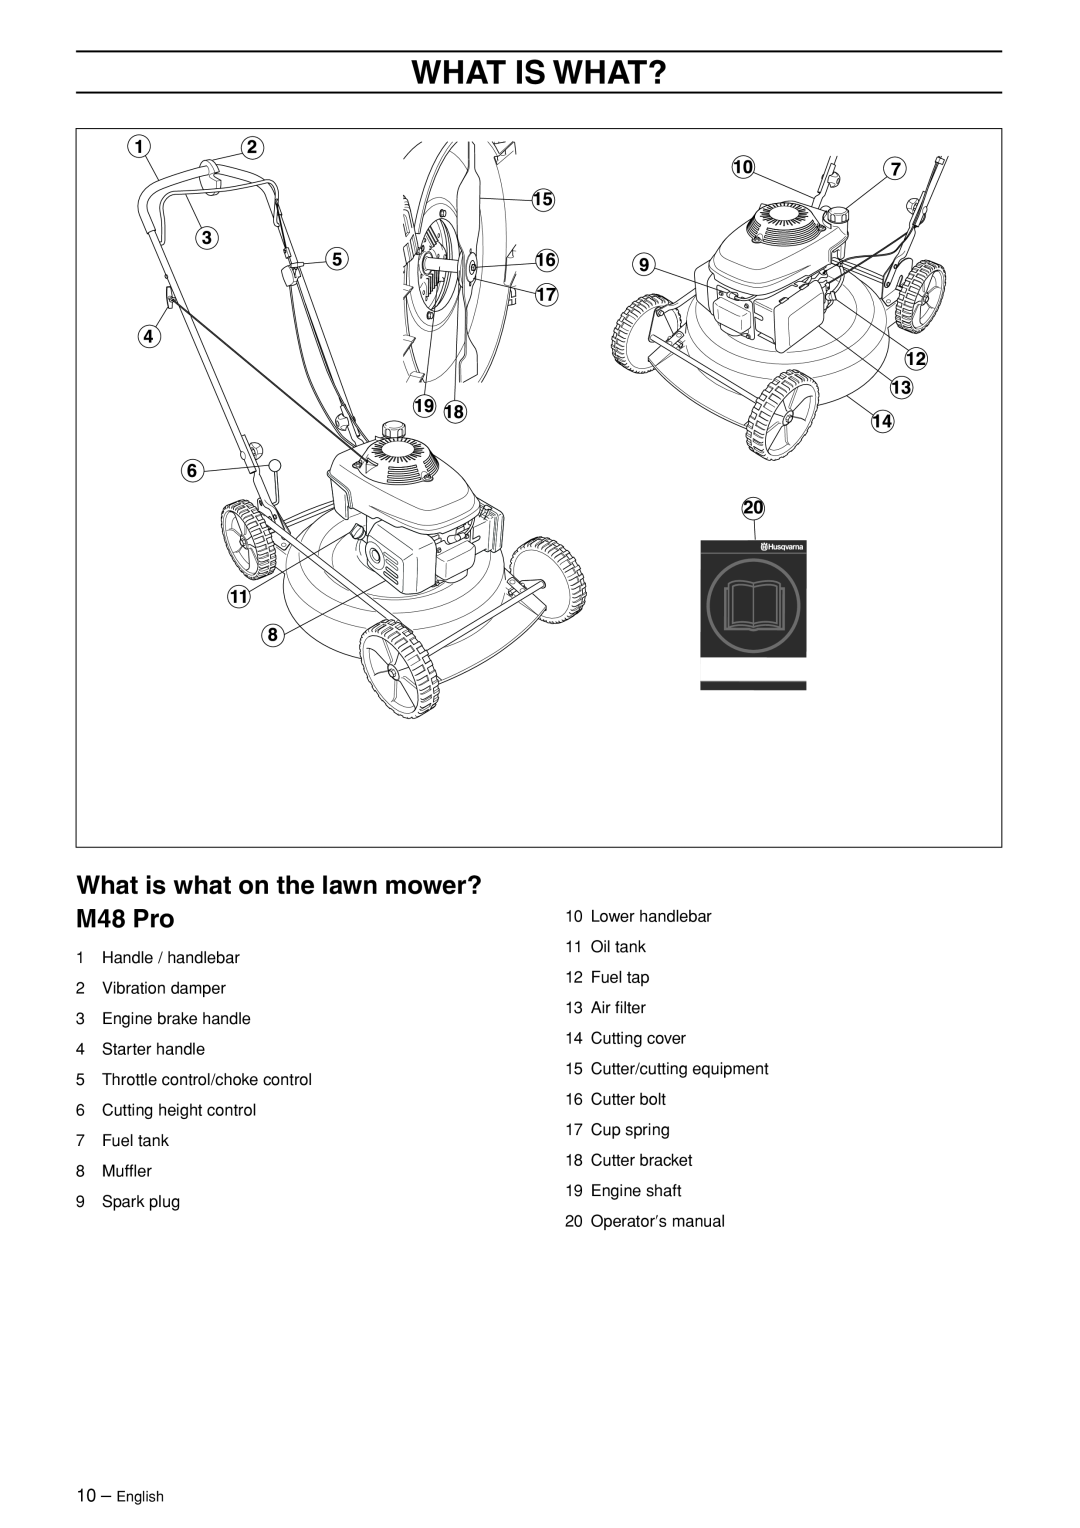 Husqvarna M48 Pro, M53 S Pro manual What Is What?, What is what on the lawn mower? 